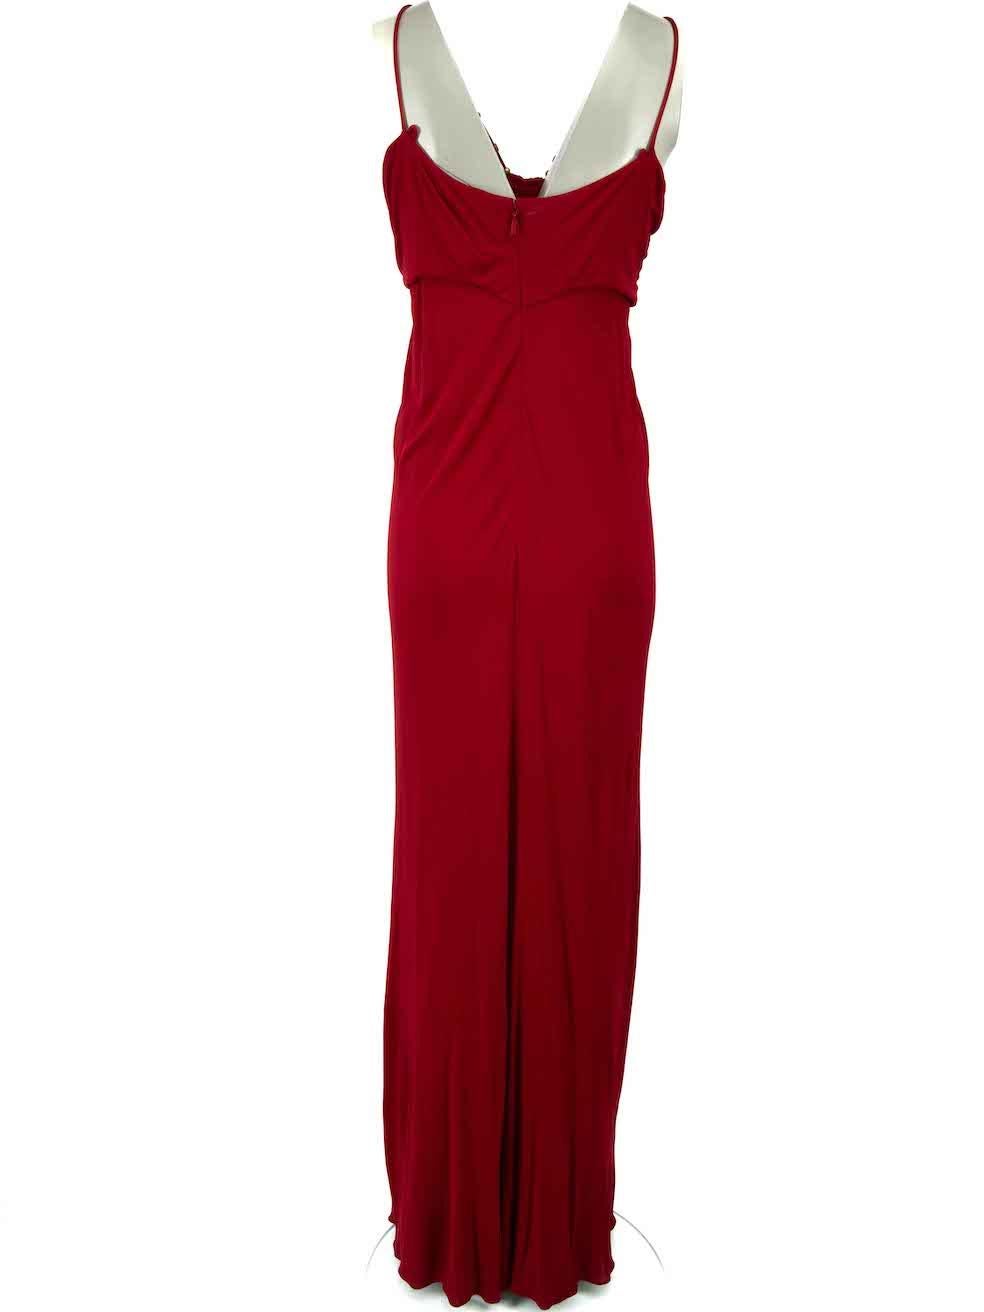 Gucci Red Sleeveless Draped Maxi Dress Size M In Good Condition For Sale In London, GB